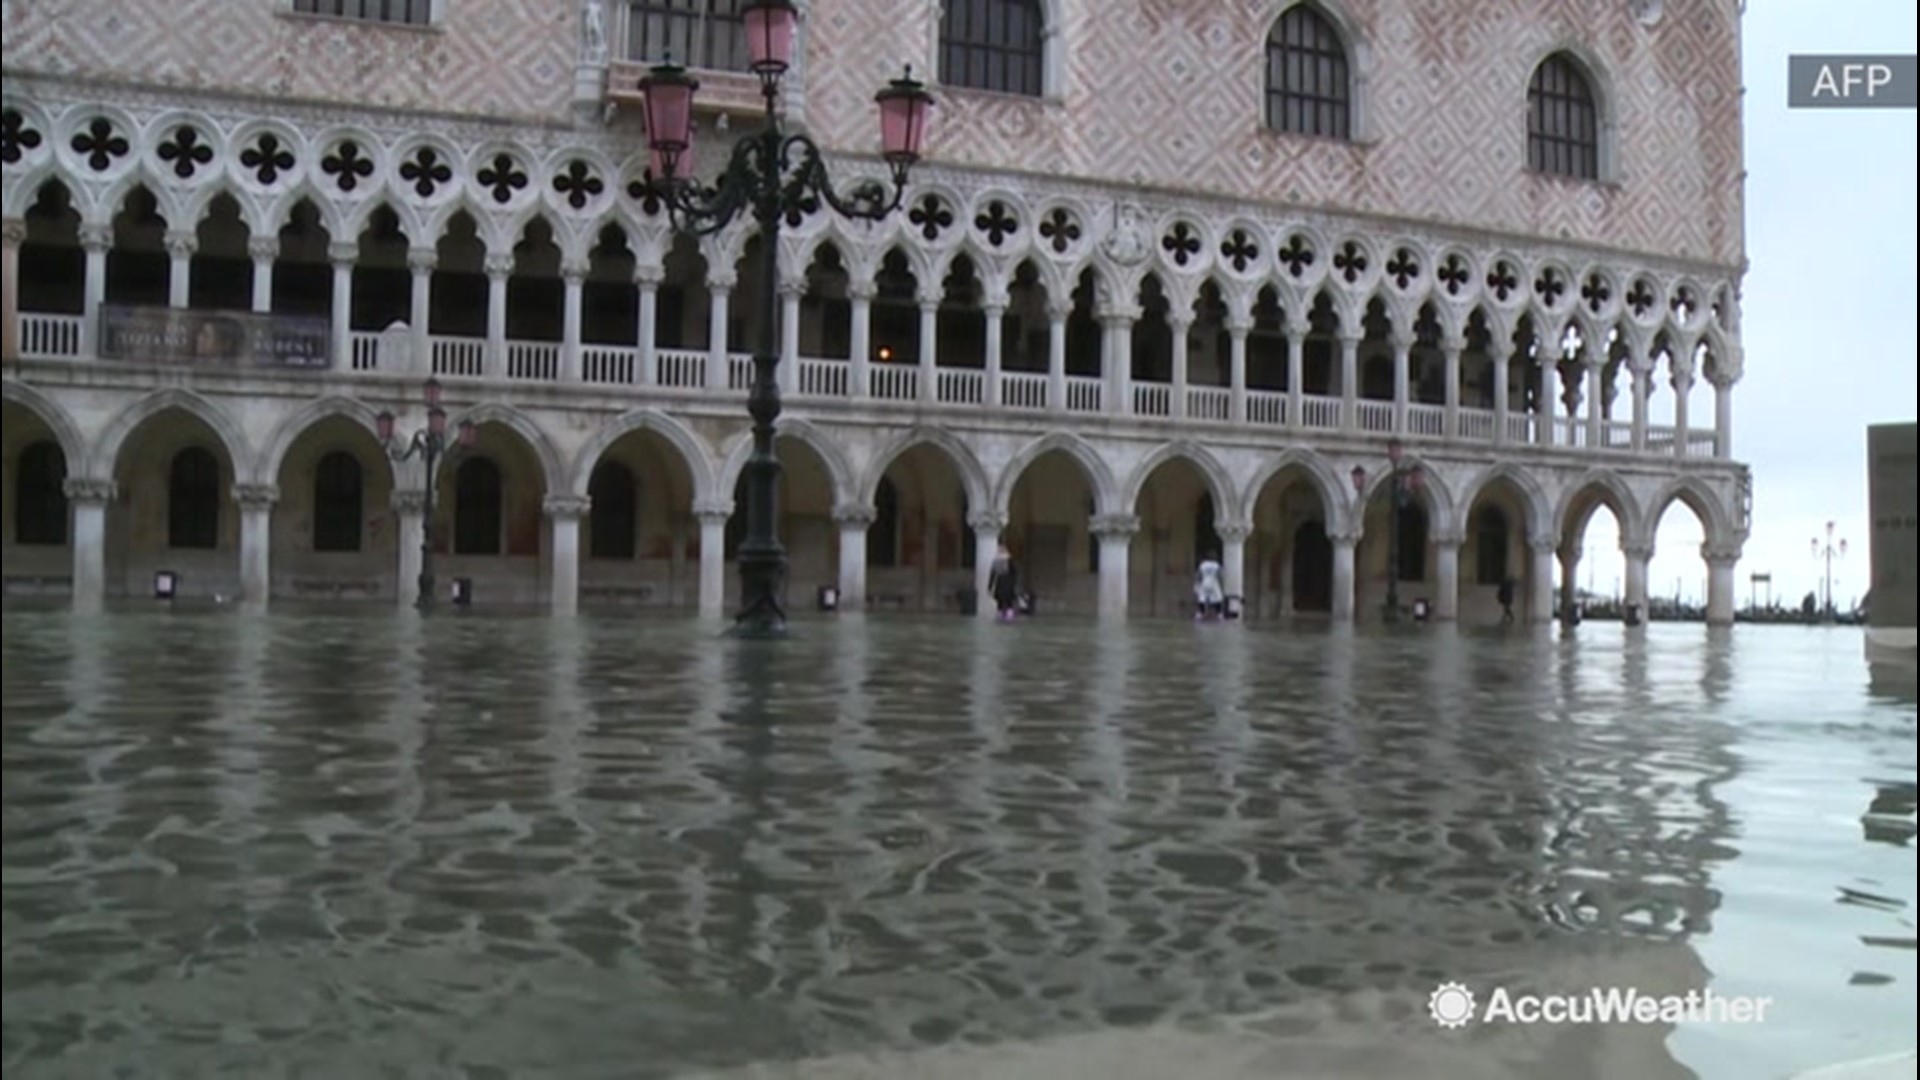 Homes and businesses were flooded, boats were beached, and residents and tourists alike had to walk through water as the highest tide in more than 50 years swamped Venice, Italy, on Nov. 13.